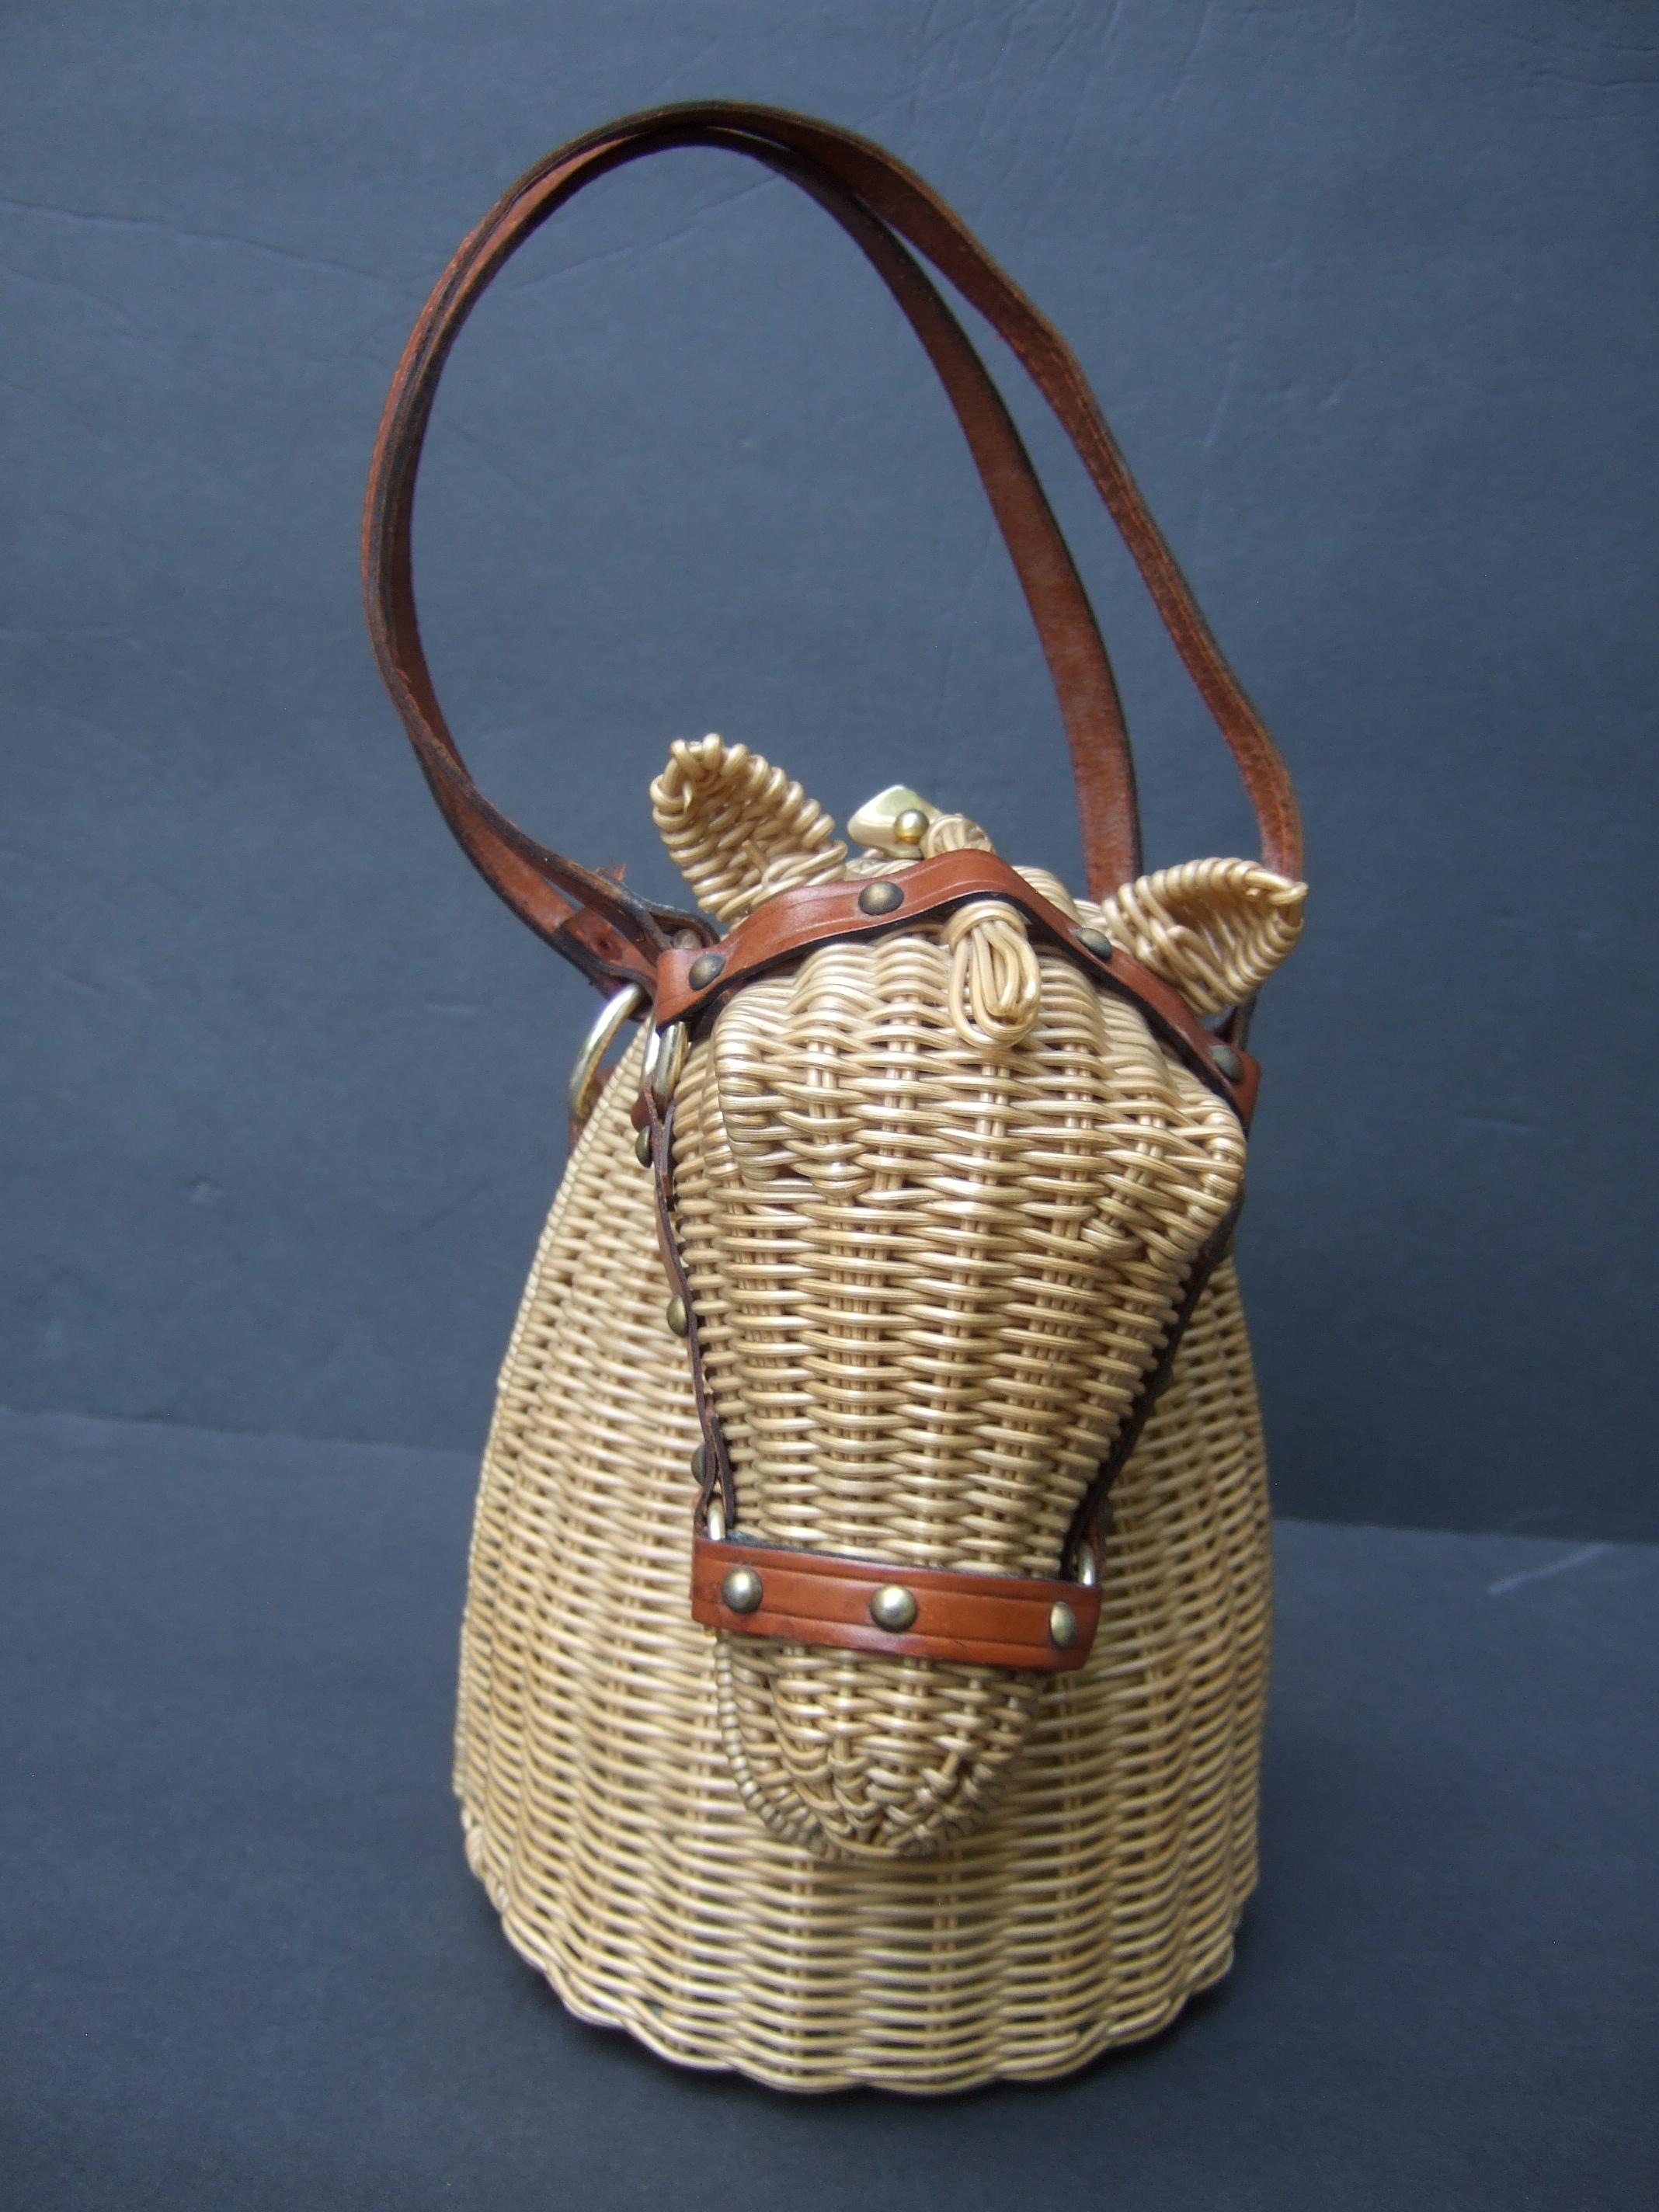 Extremely Rare Wicker Rattan Equine Handbag Designed by Marcus Brothers c 1970 8